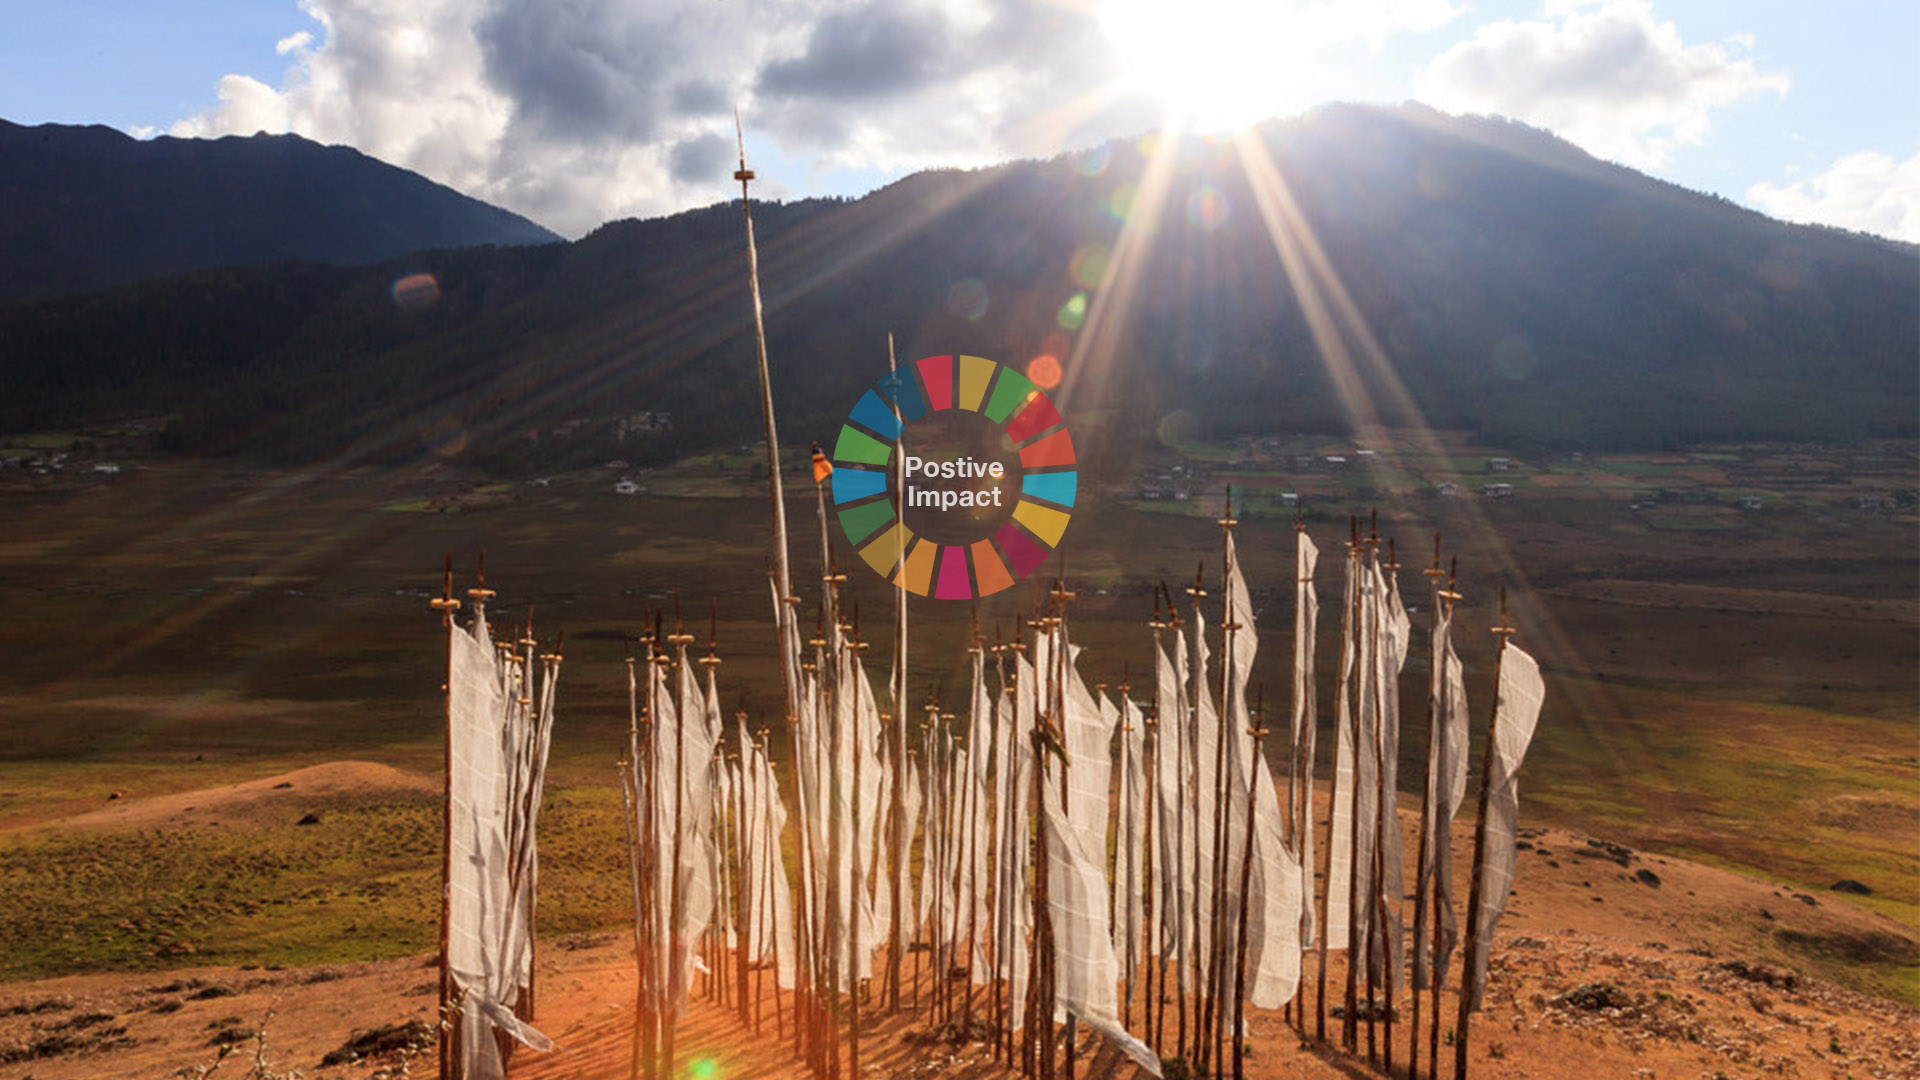 Bhutan is much more than a happy place